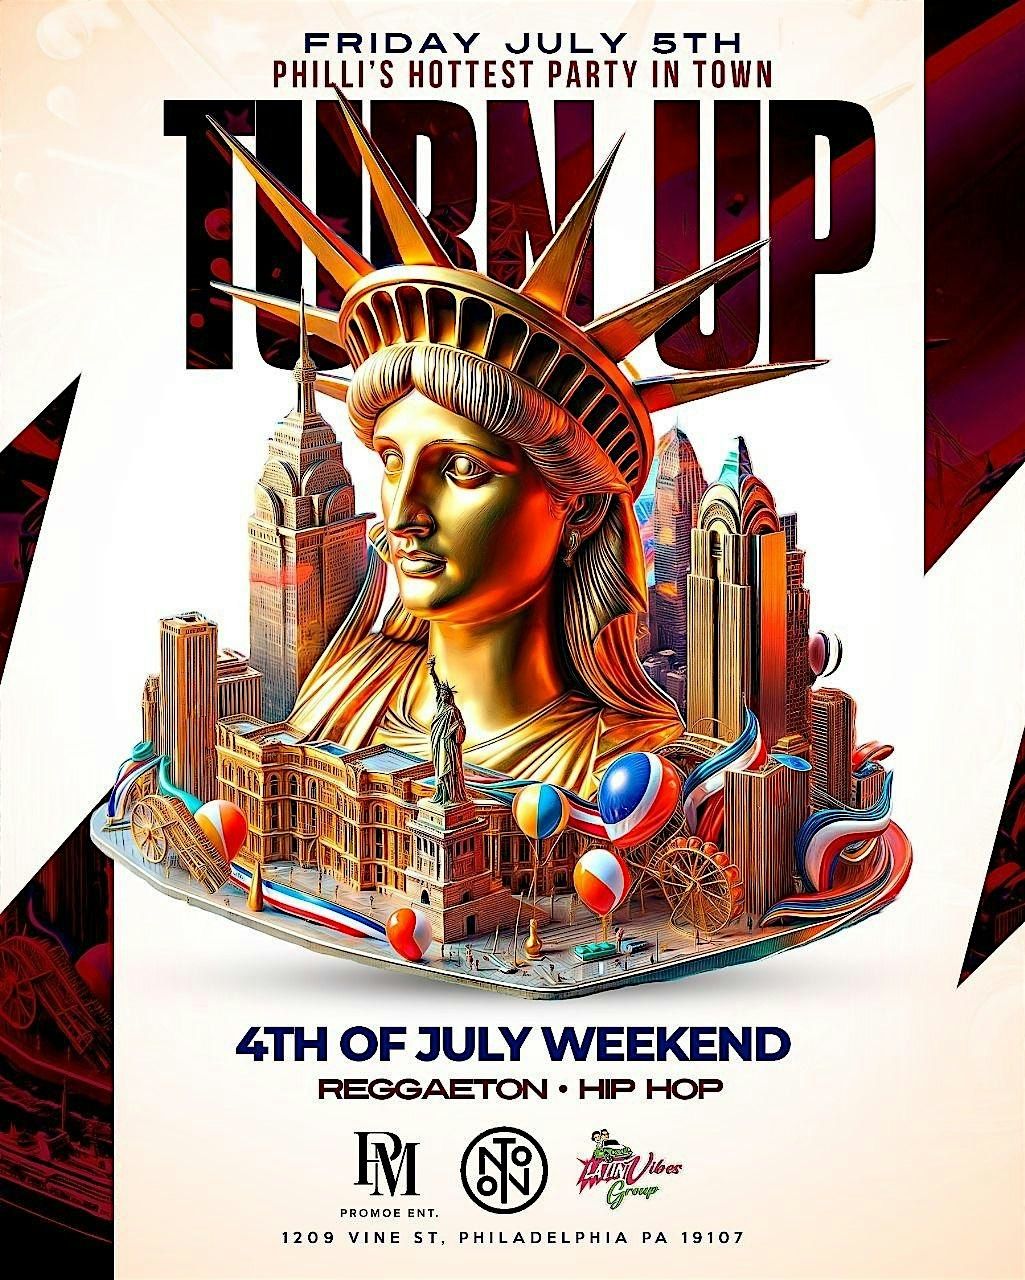 TURN UP NOTO PHILLY #4OFJULYWEEKEND